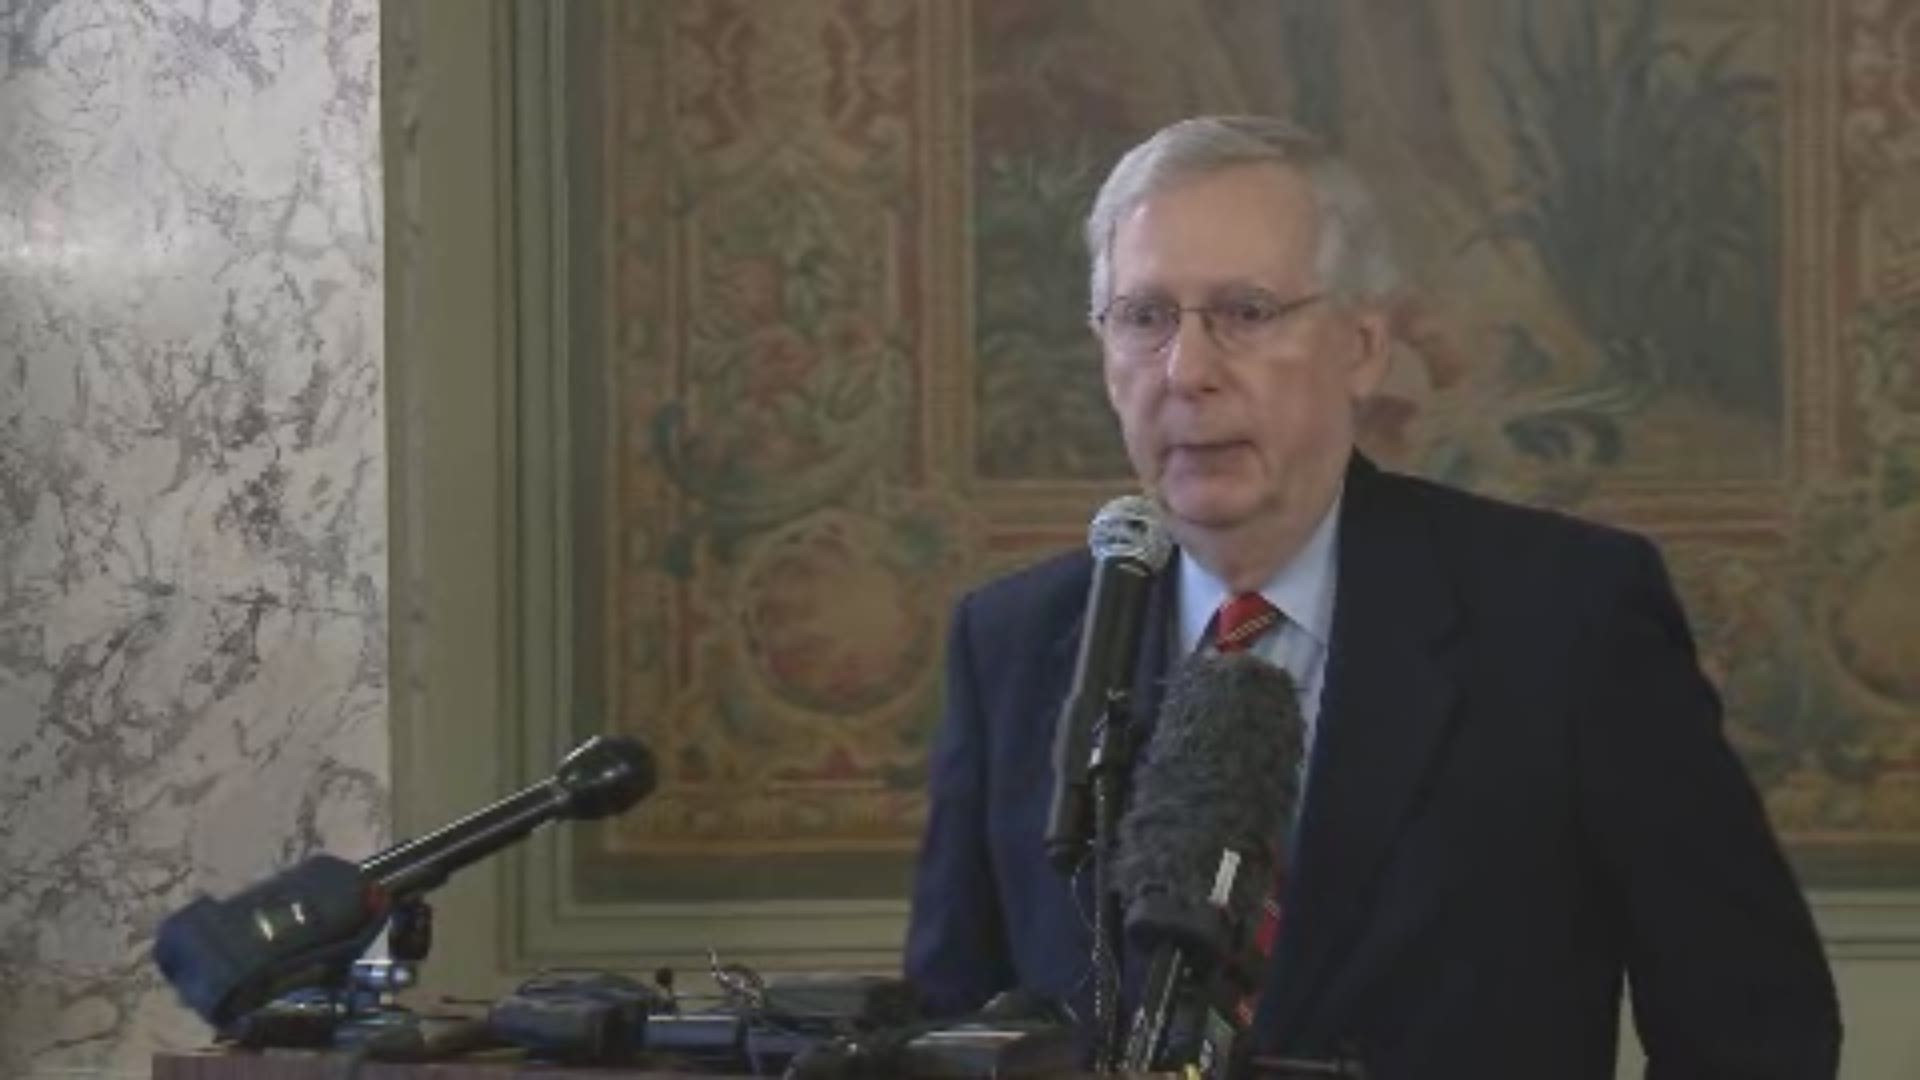 Sen. Mitch McConnell addressed the media Friday, talked about AG nominee and elections